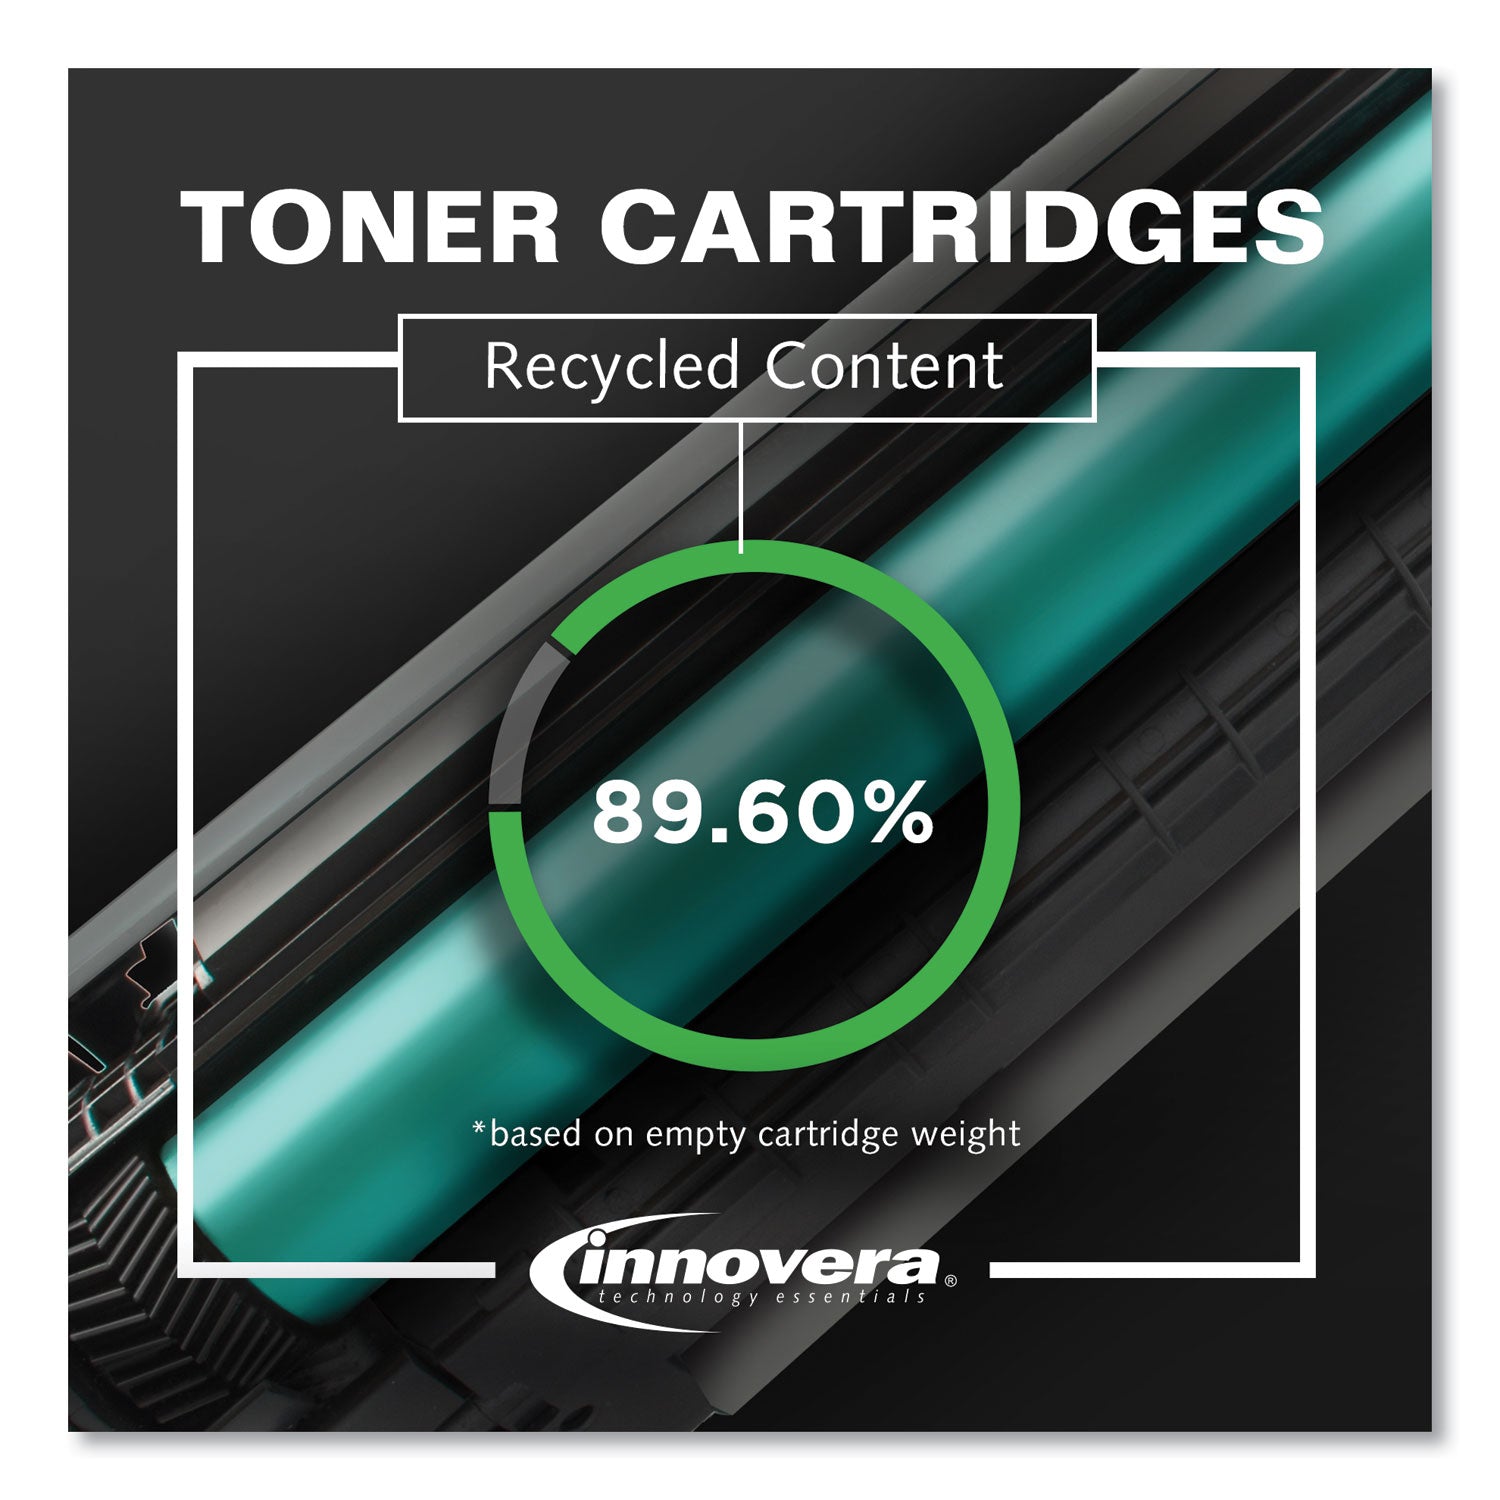 Remanufactured Black High-Yield Toner, Replacement for 305X (CE410X), 4,000 Page-Yield - 